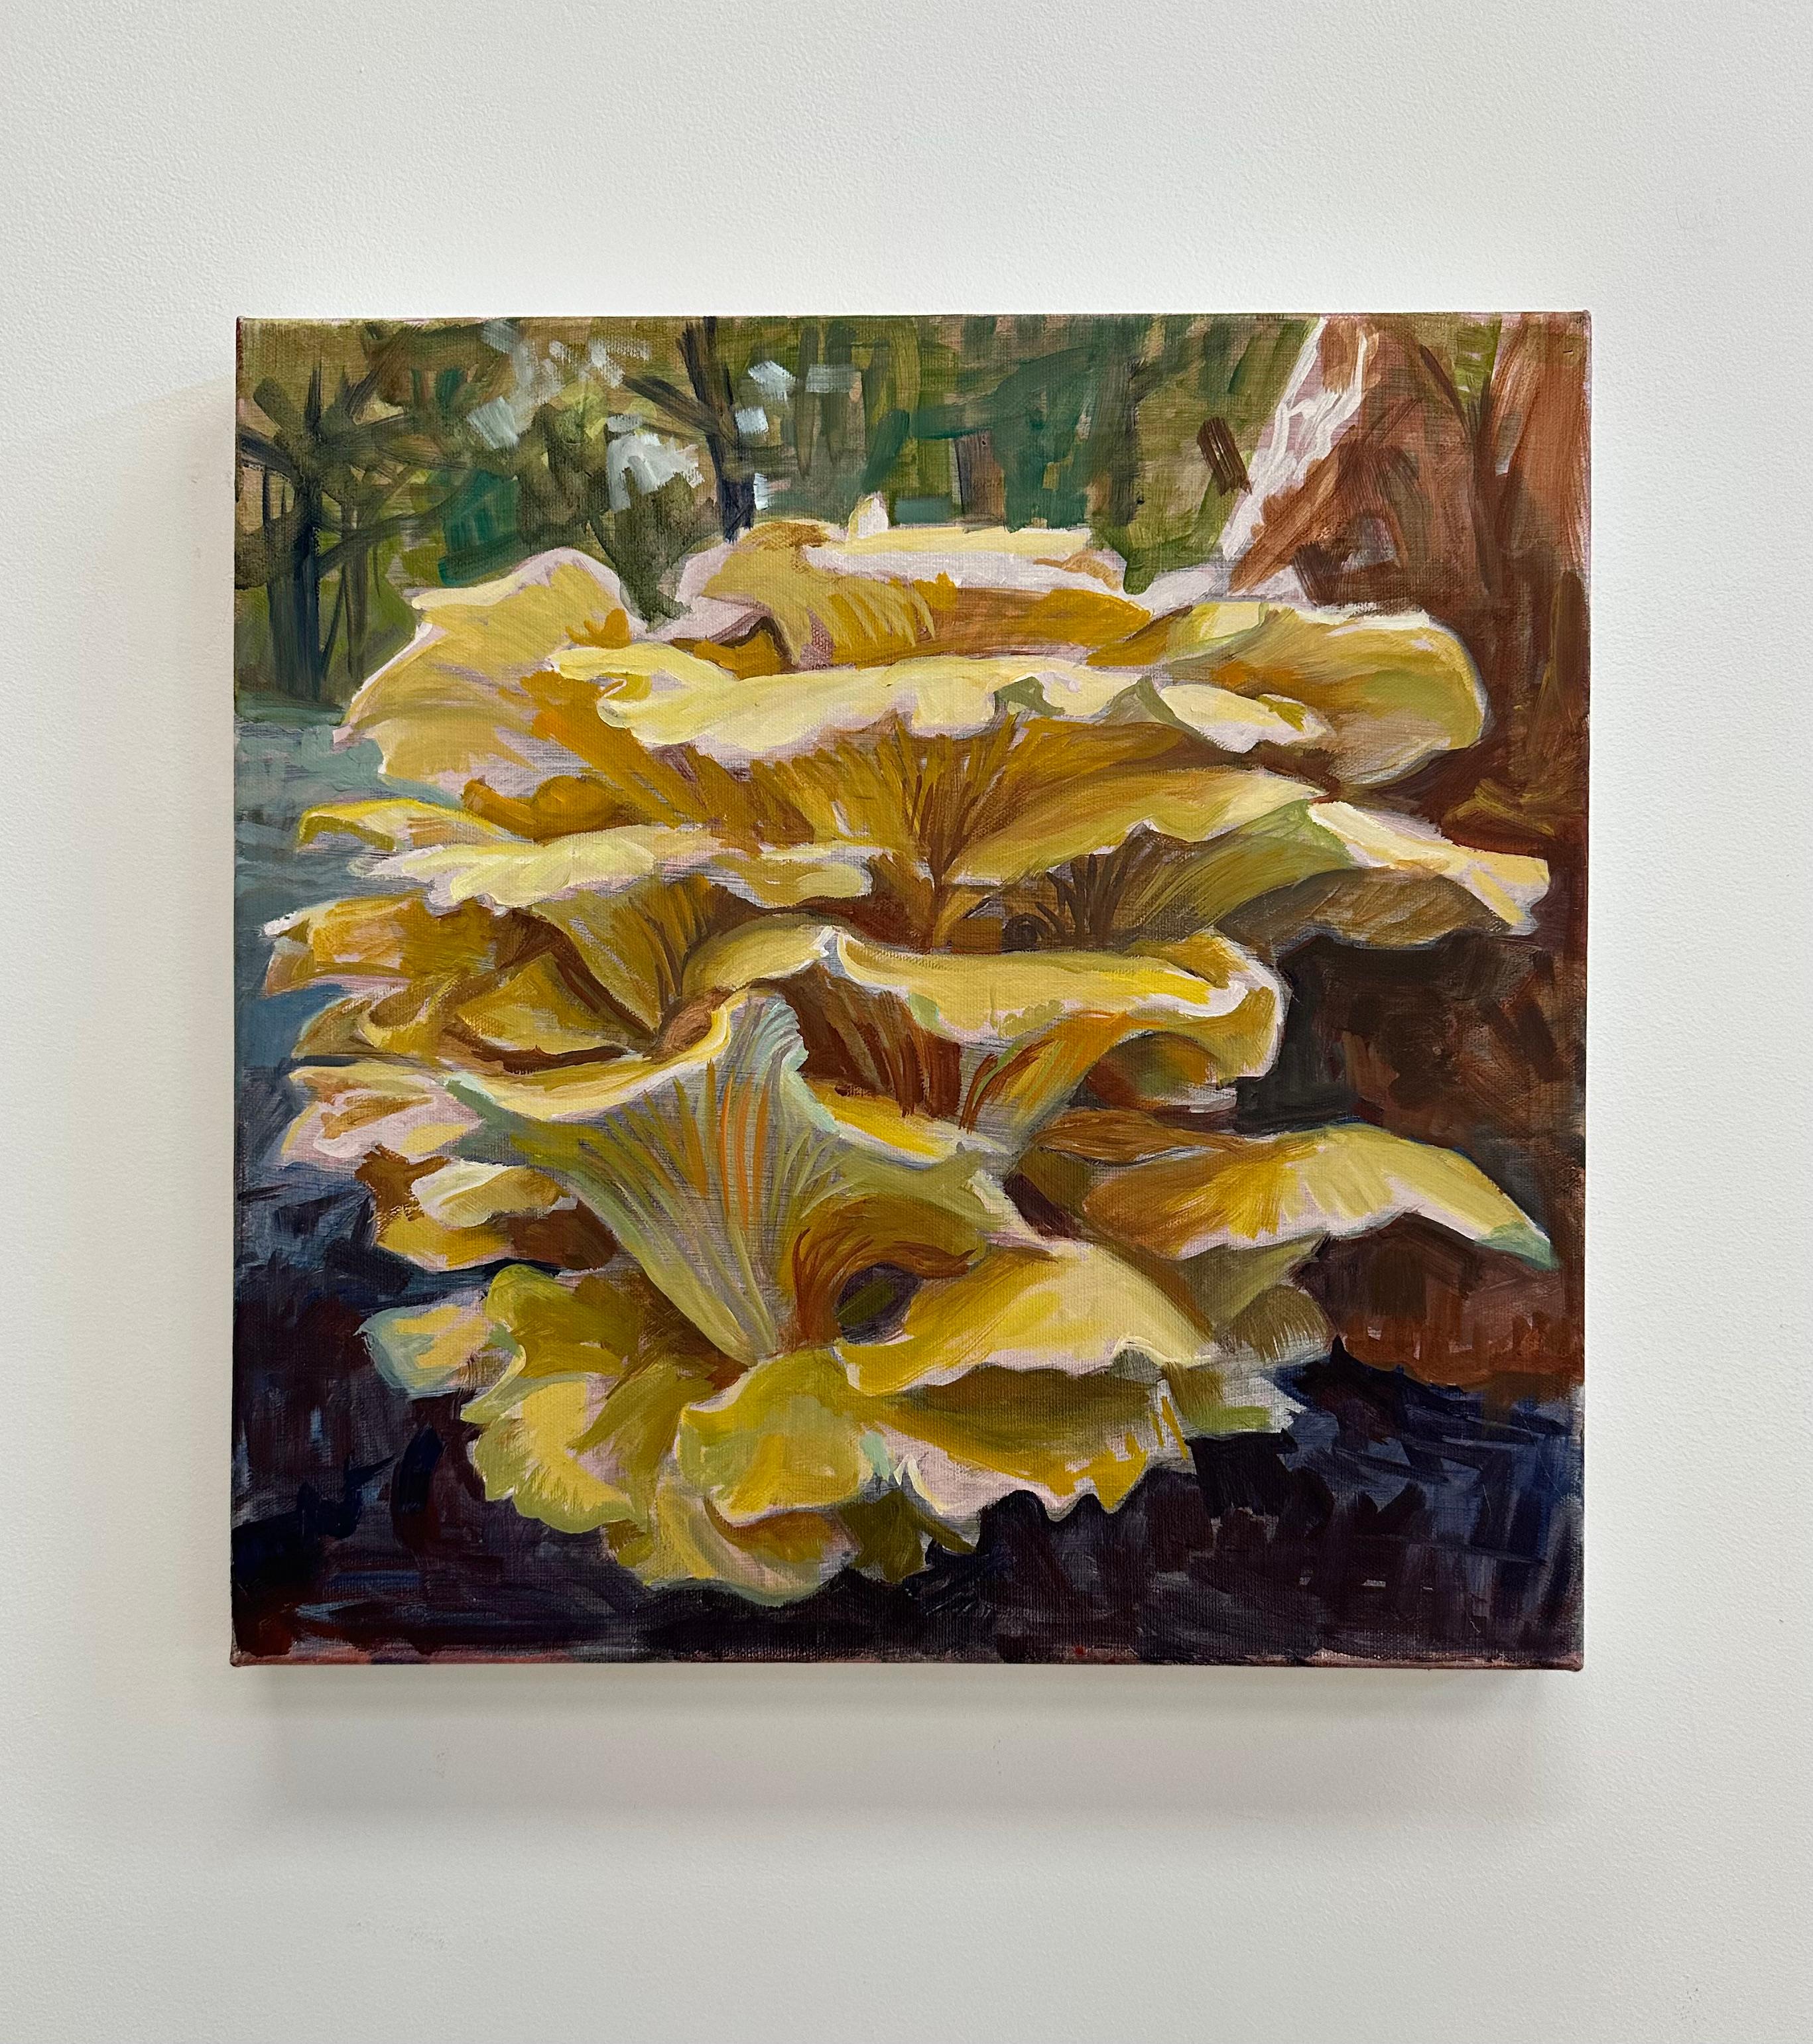 Study for Golden Oysters Two, Mushroom Fungi, Golden Yellow, Ochre, Brown - Painting by Andrea Kantrowitz